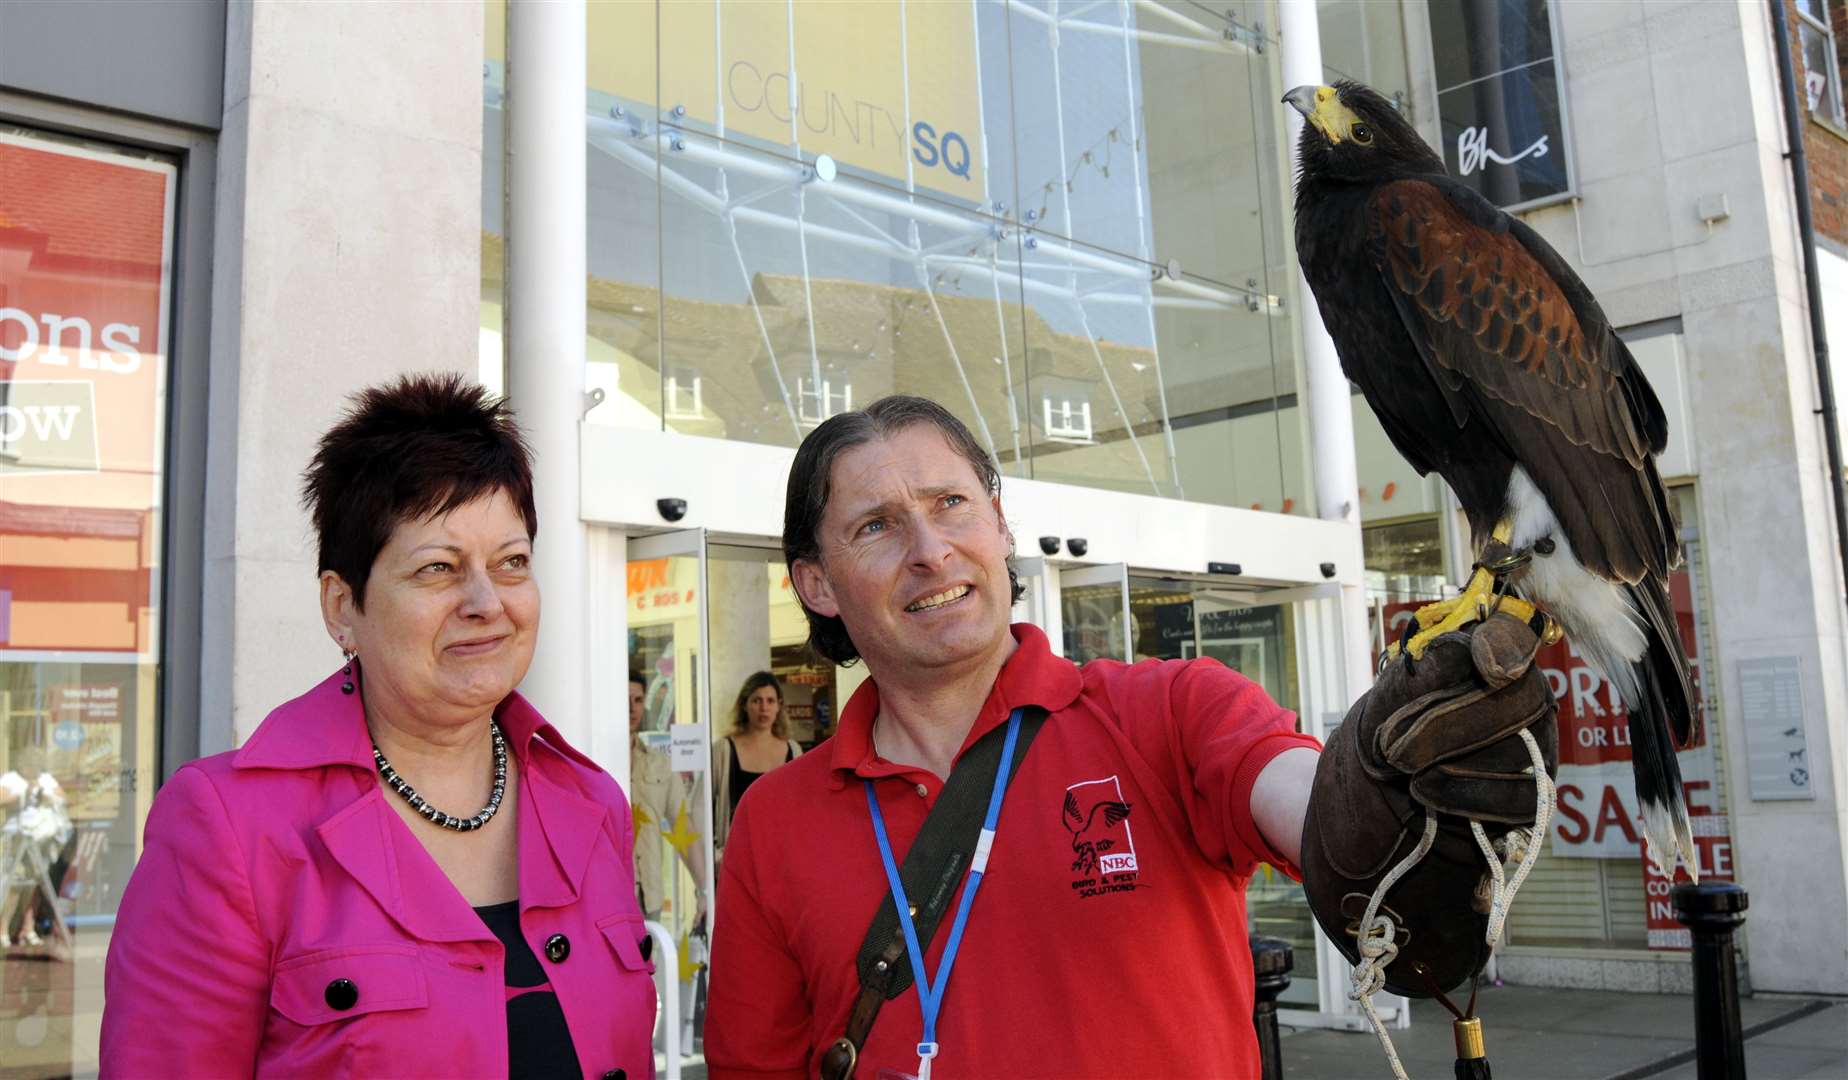 County Square bosses used a hawk in 2010 - this photo shows centre manager Frances Burt with Gary Railton and a male Harris Hawk